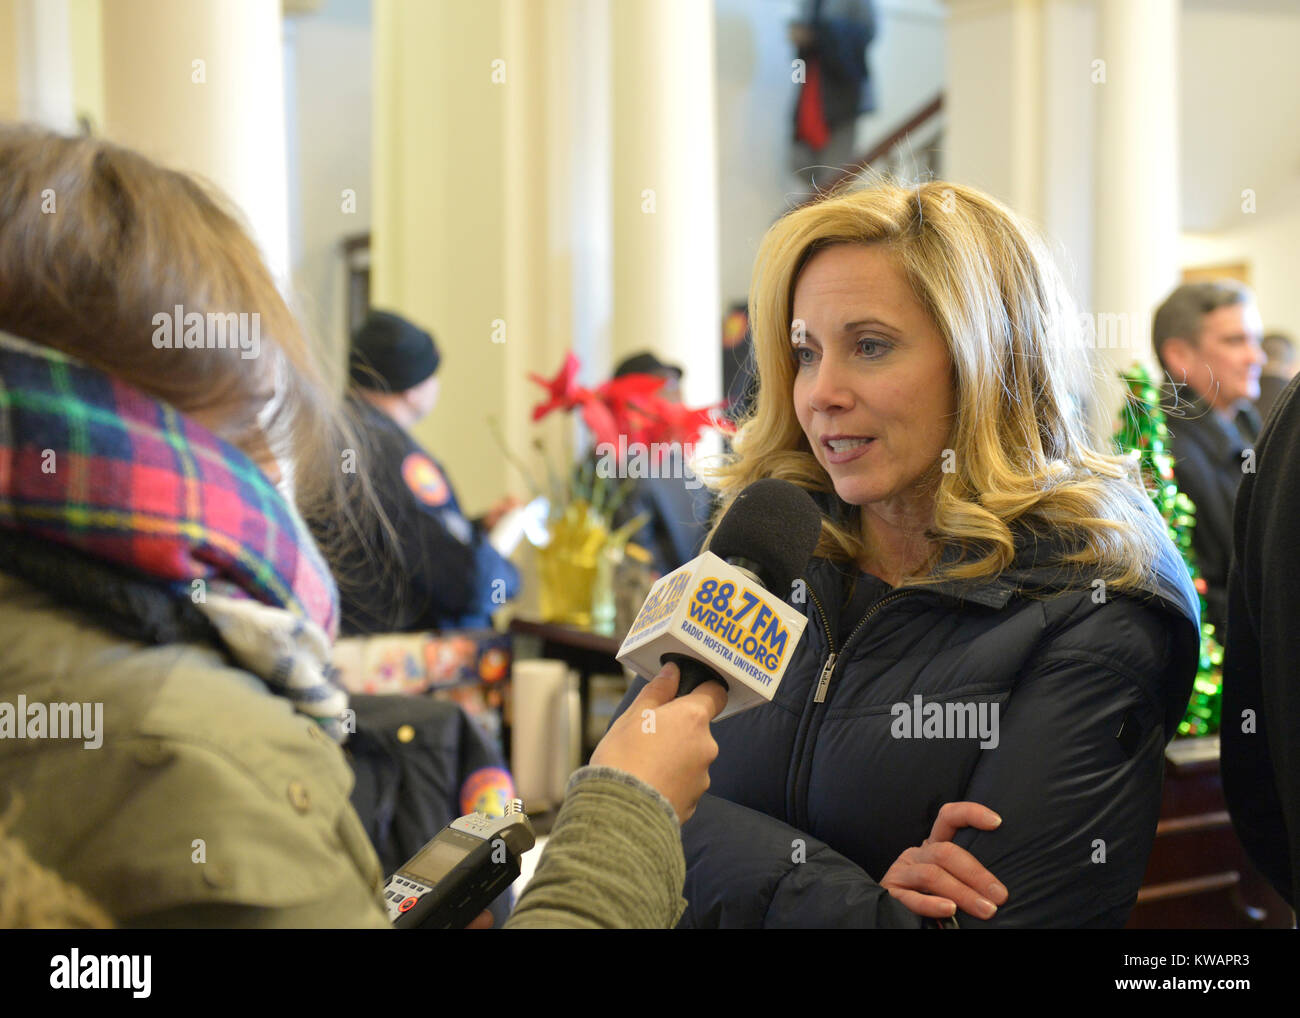 Mineola, New York, USA. January 1, 2018. Town of Hempstead Supervisor LAURA GILLEN, a Democrat, is interviewed by a reporter for Hofstra University's WRHU radio station, after historic swearing-In of Laura Curran as Nassau County Executive. They were in the Theodore Roosevelt Executive & Legislative Building, which the Curran swearing-in was held in front of the entrance outdoors. Gillen's swearing in was held that morning at Hofstra University. Stock Photo